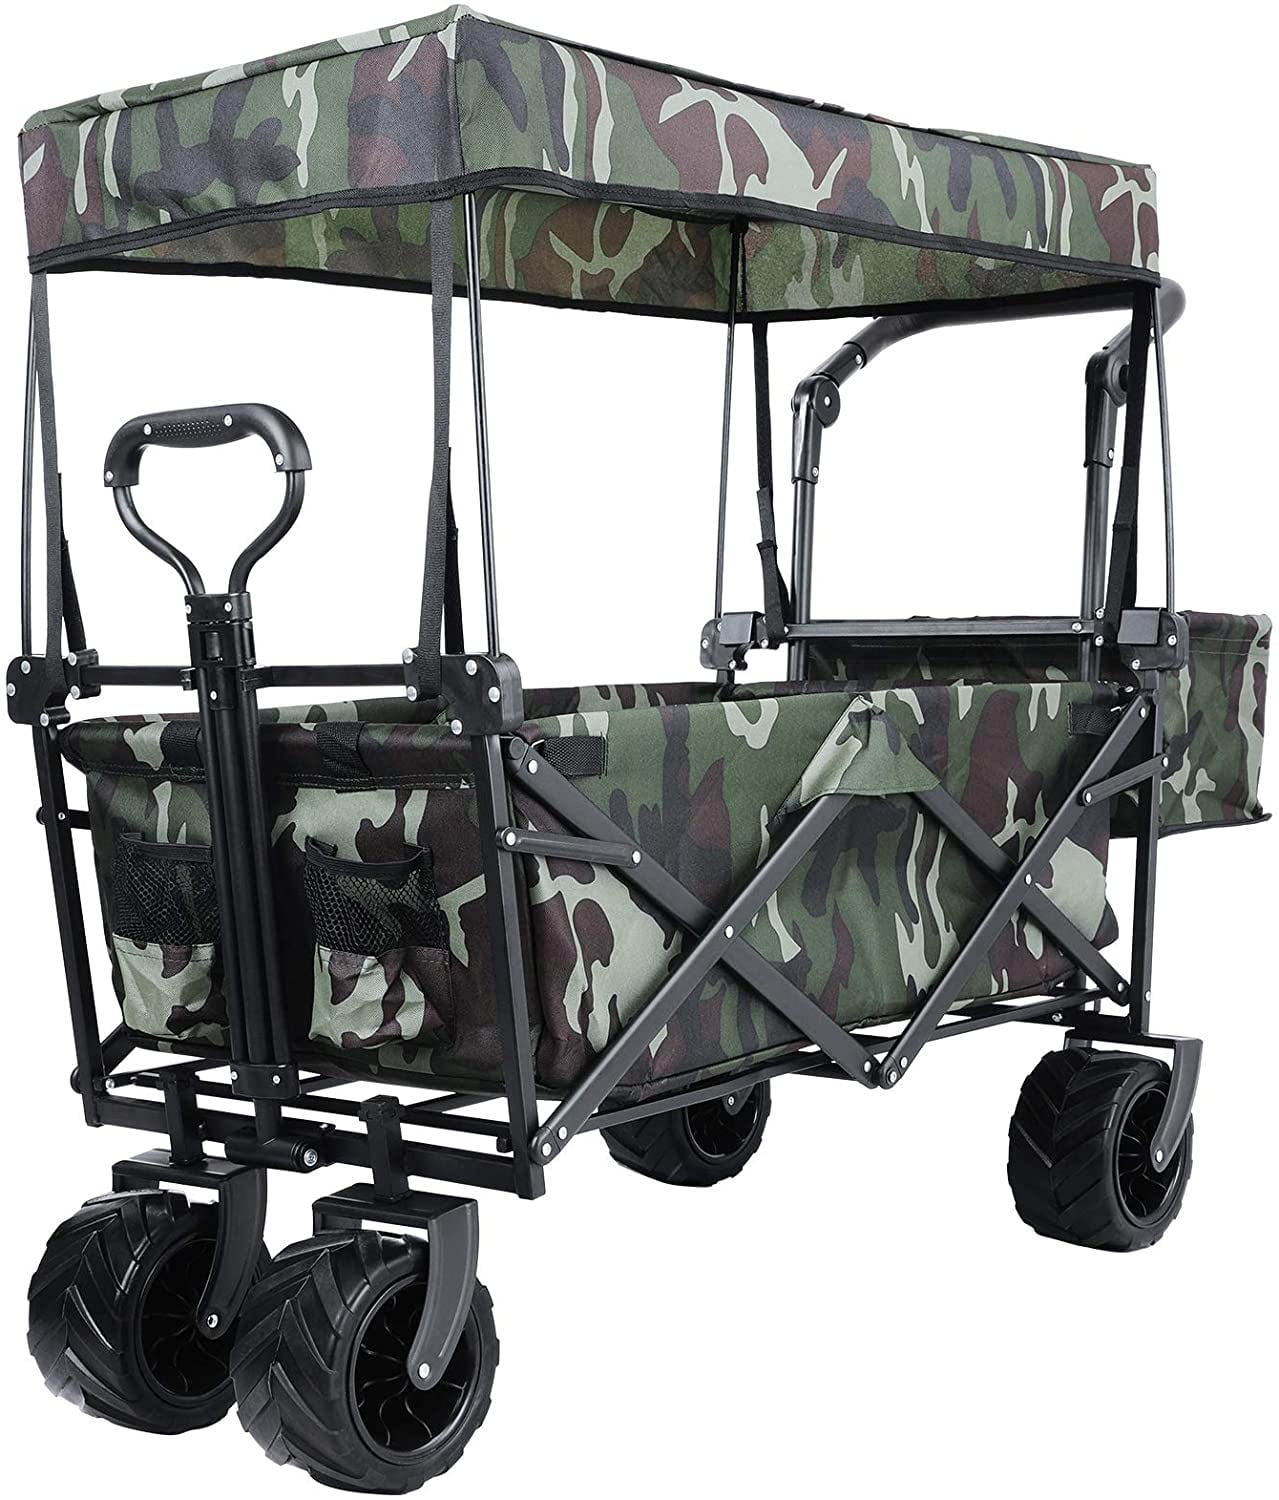 lazyBuddy Heavy Duty Collapsible Utility Wagon With Canopy